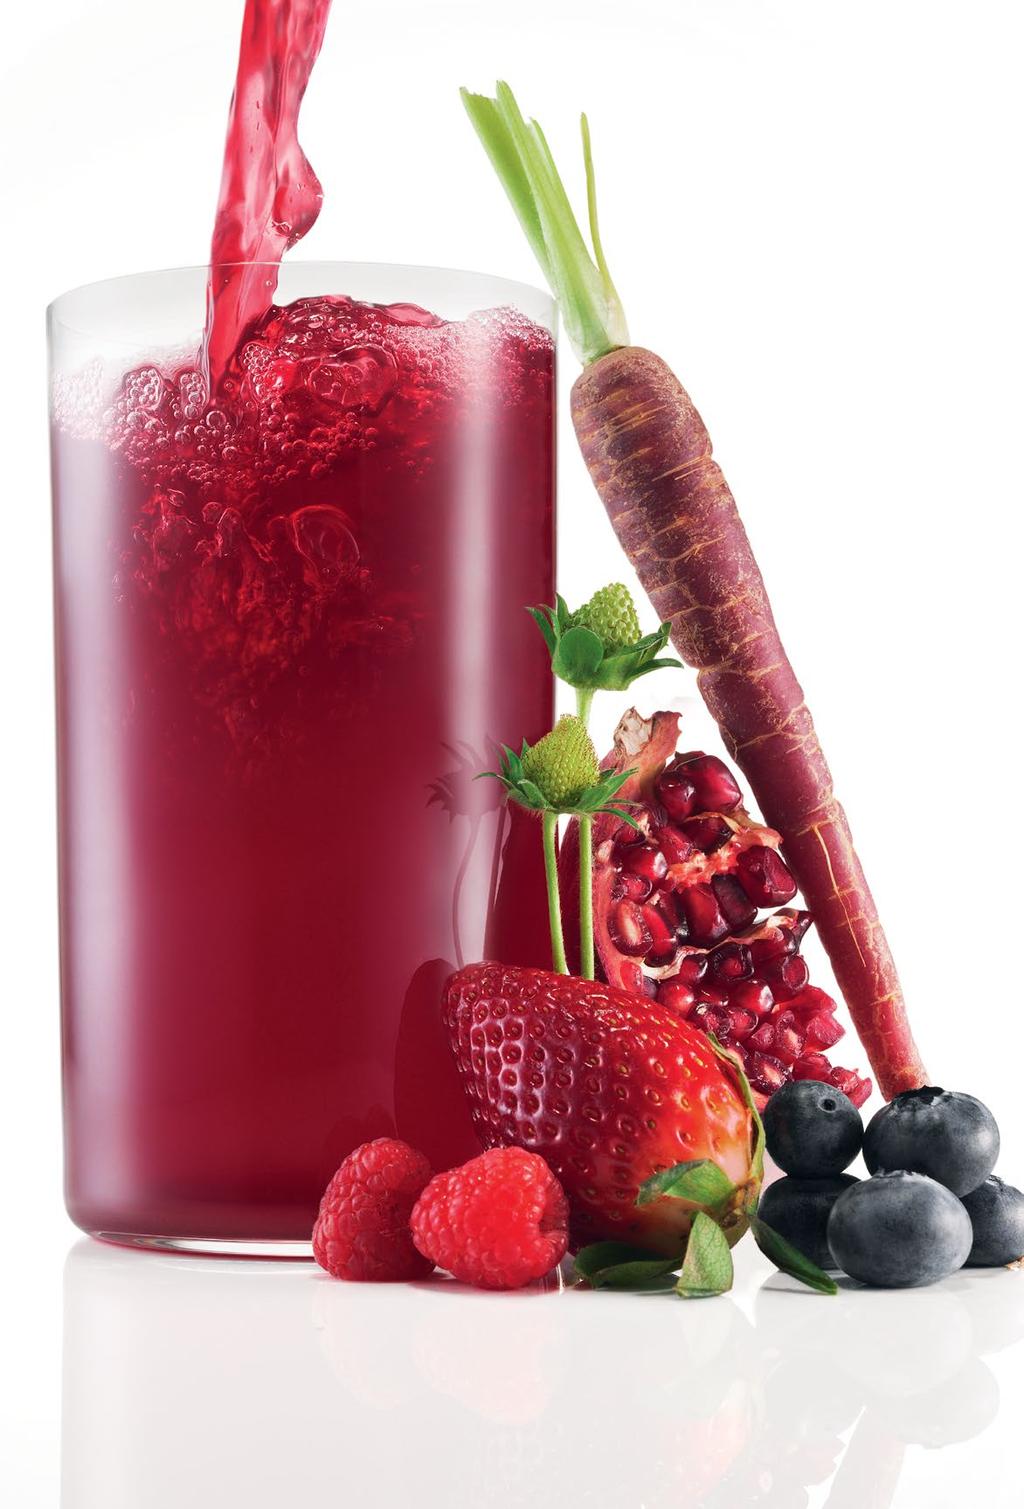 Powerful antioxidant support in one teaspoon Blend of 8 Berries 2 Super Fruits 2 Vegetables SIMPLY BLEND WITH WATER, SMOOTHIE, YOGHURT OR CEREAL Great Berry Flavour Free from artificial colours and